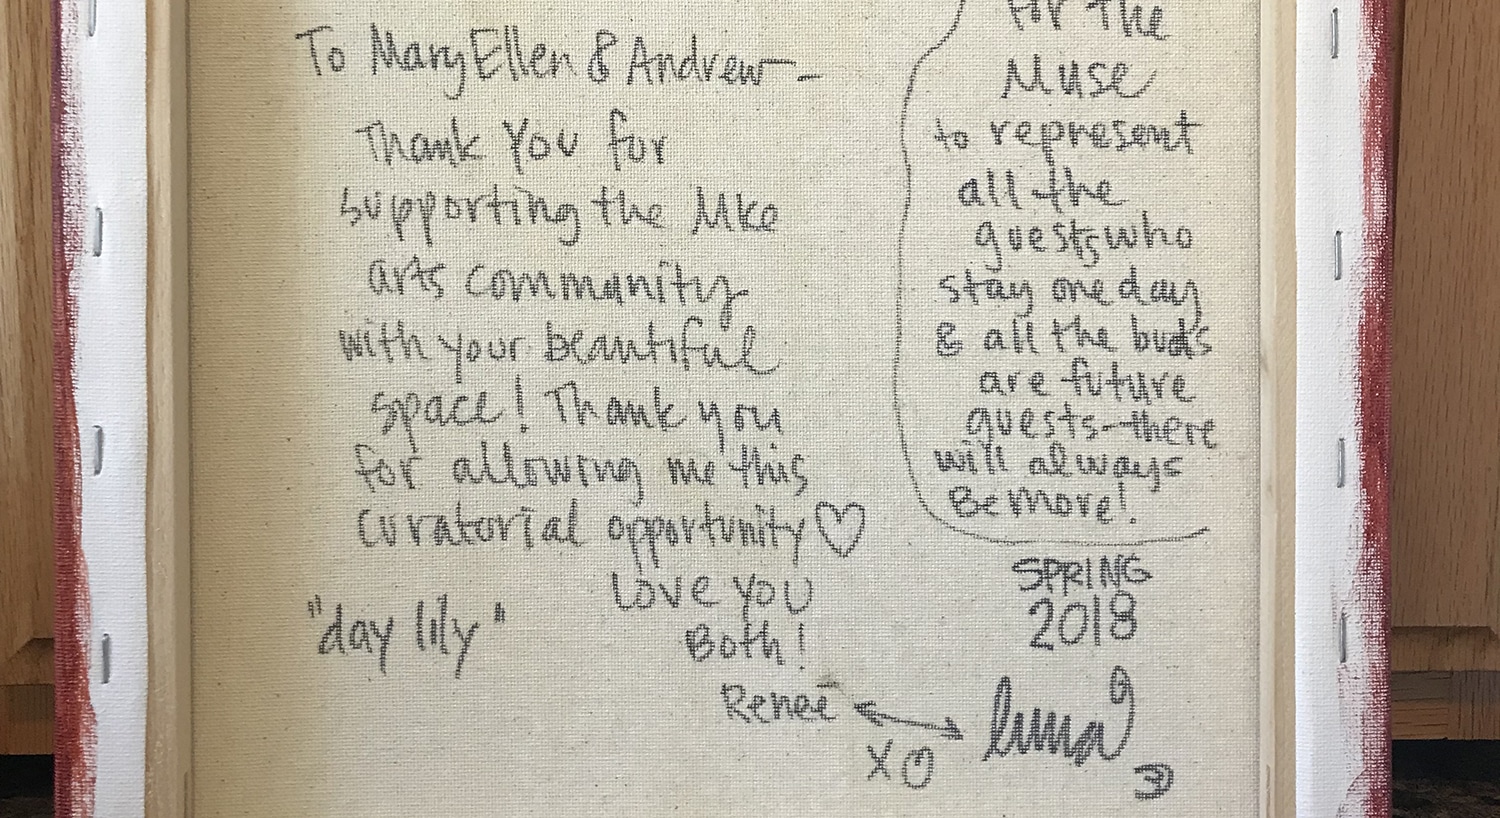 A note from artist Renee Luna written on the canvas back of a painting to Mary Ellen and Andrew